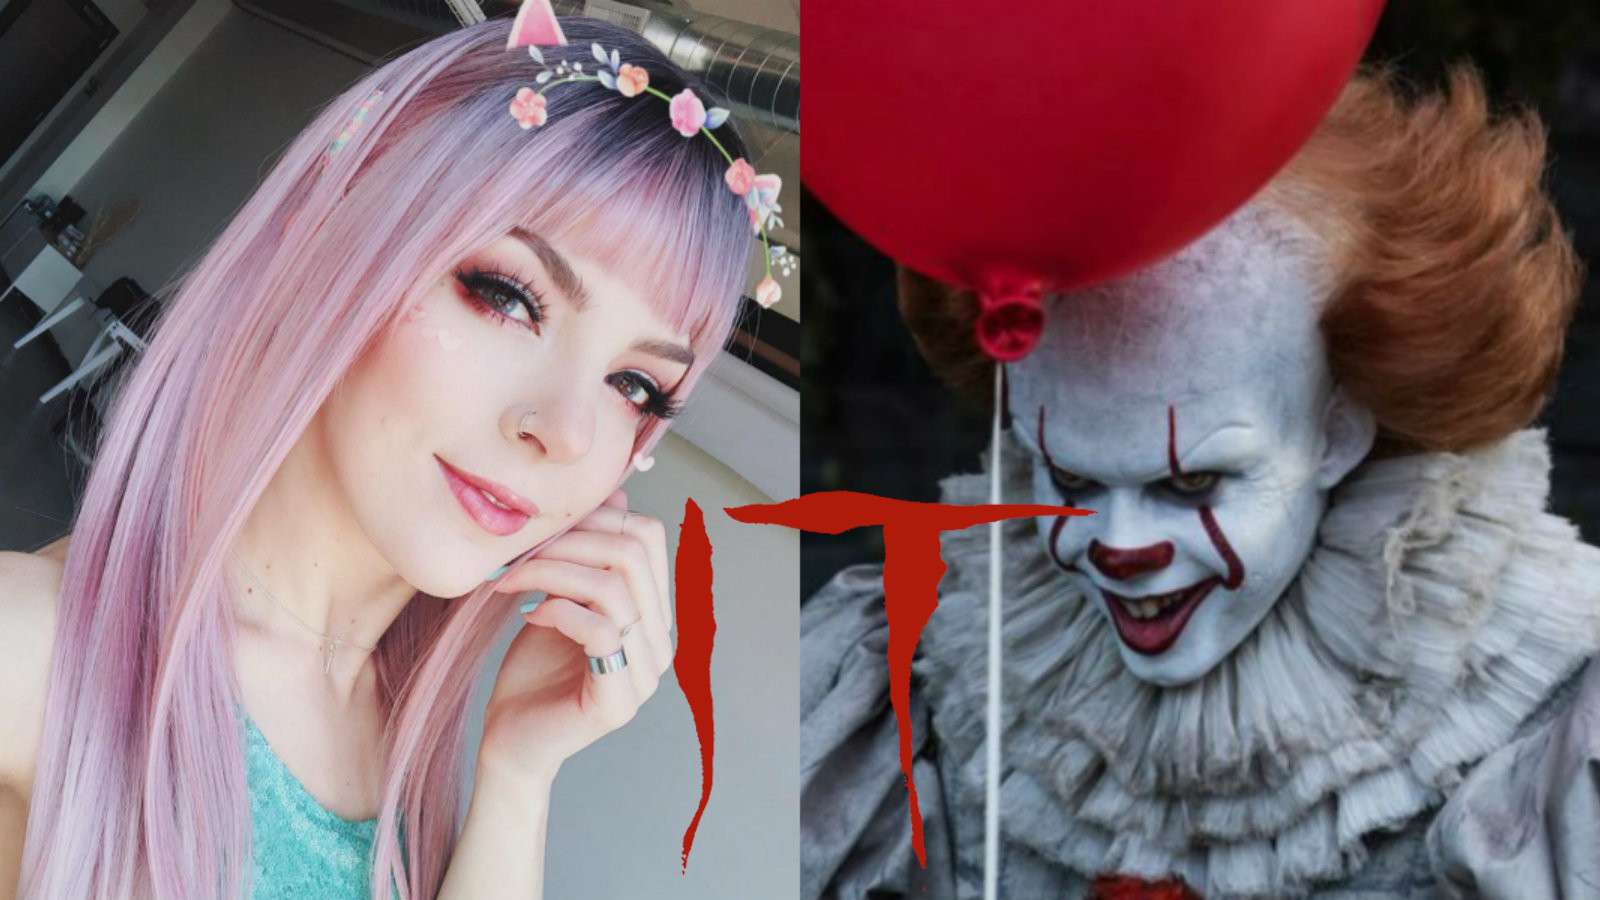 Cosplayer as Pennywise from It